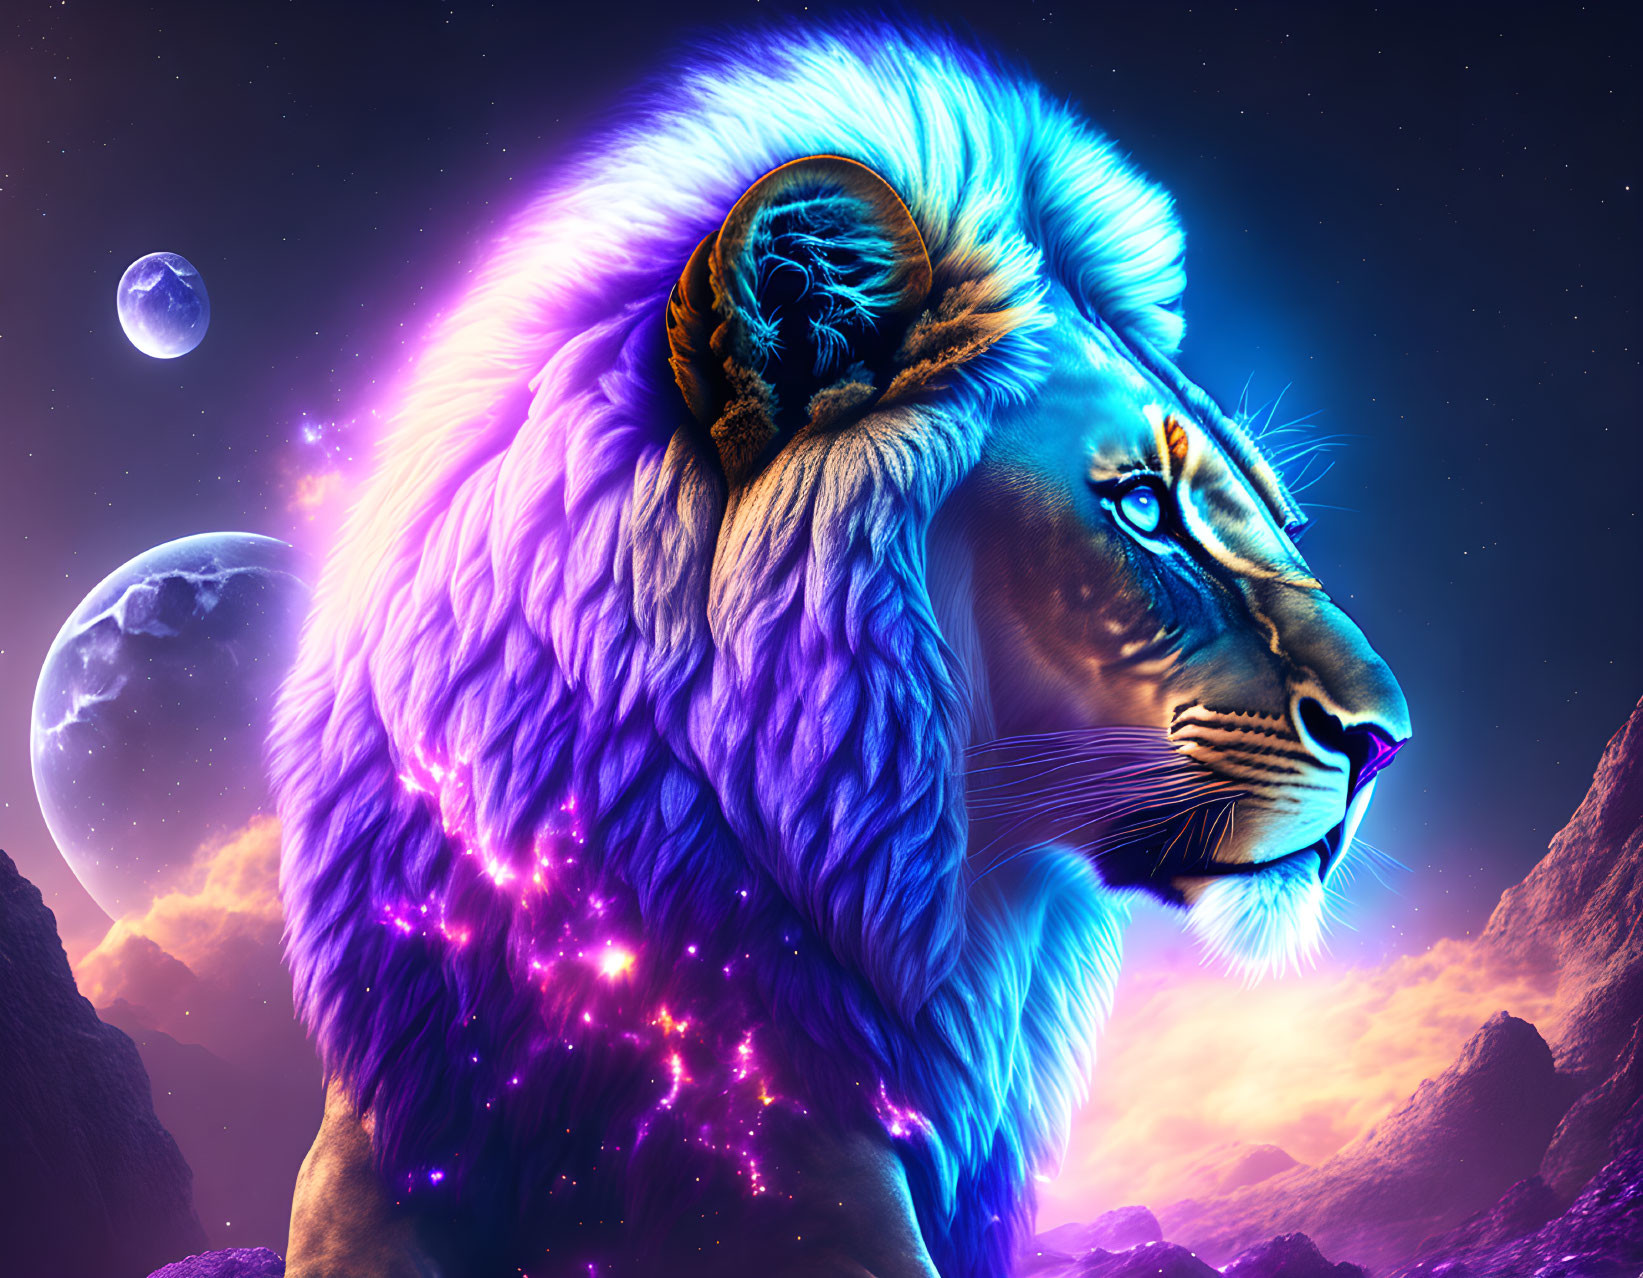 Colorful digital artwork featuring cosmic lion with glowing mane in night sky backdrop